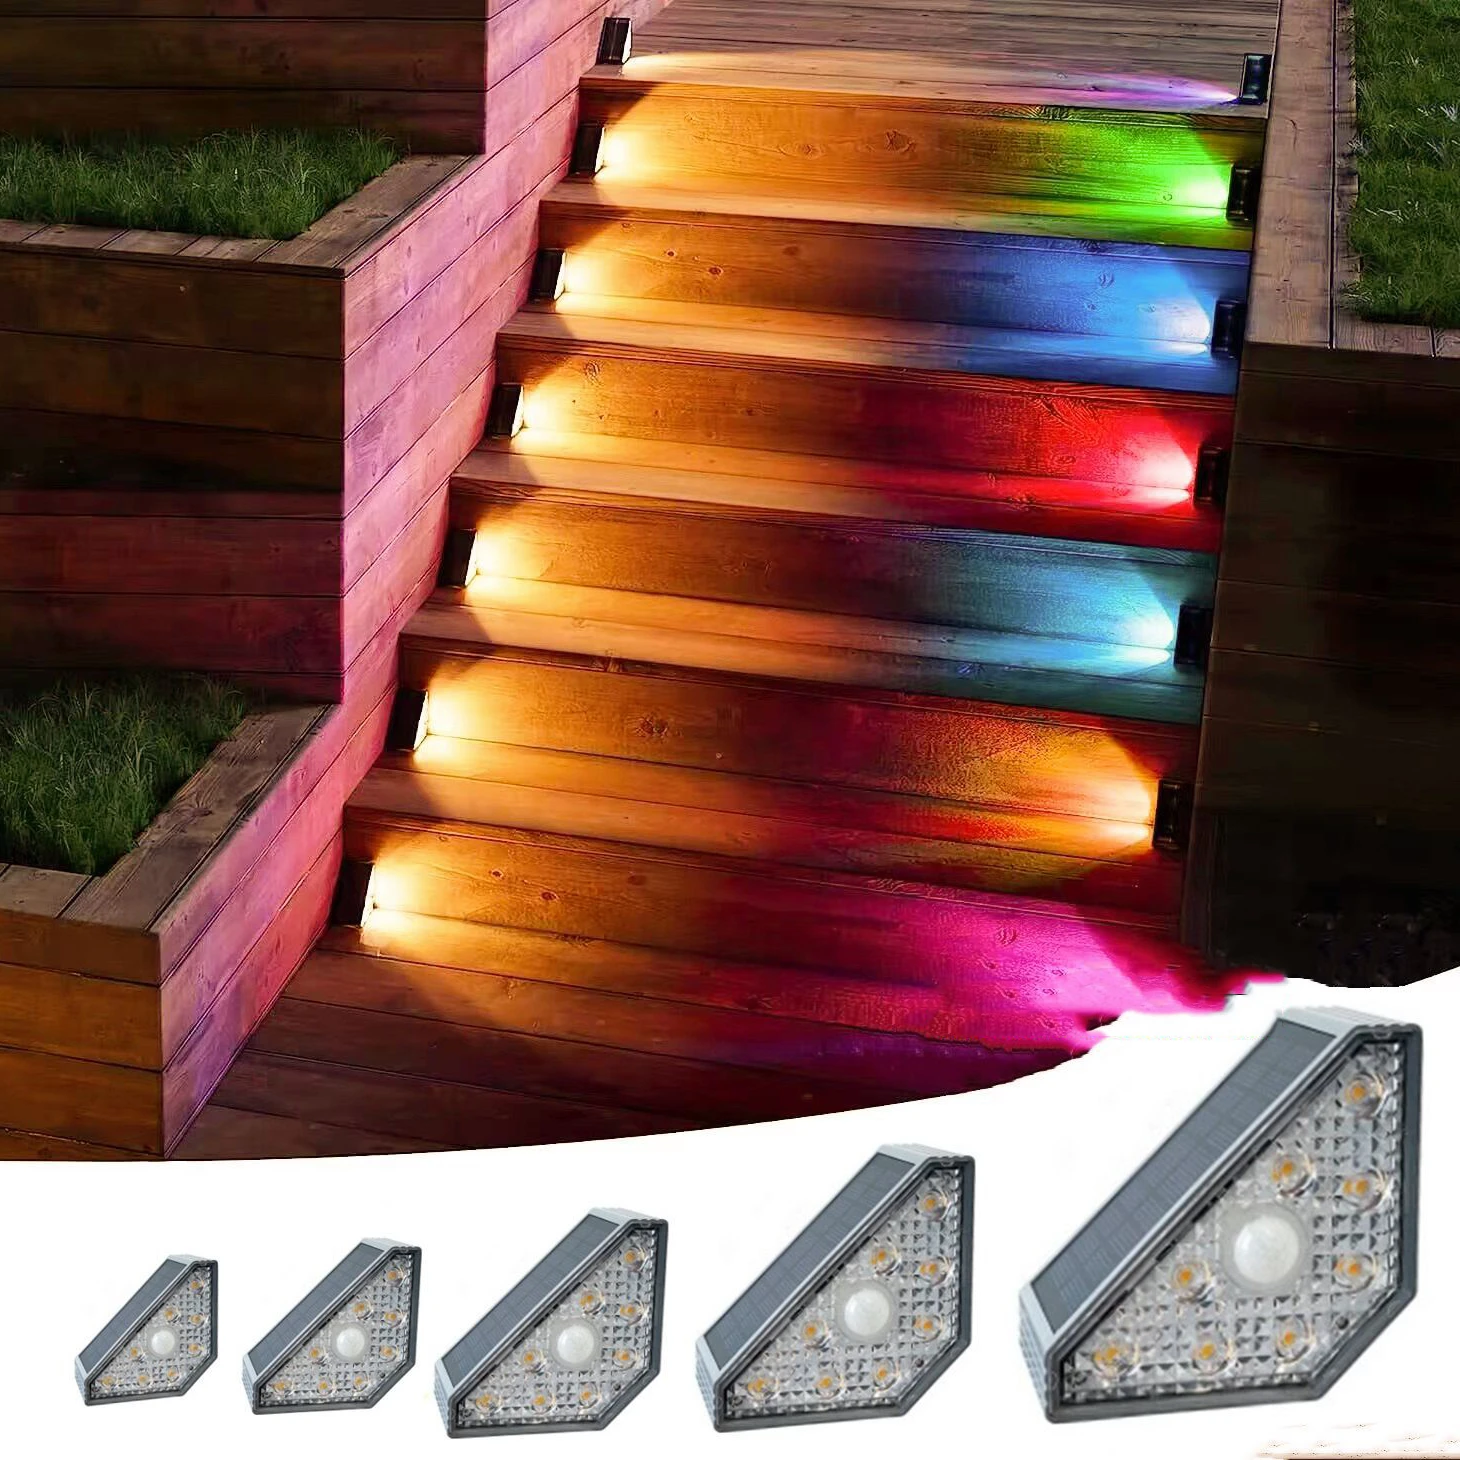 patio umbrella lights 8 lighting mode led string lights with remote control lights solar operated outdoor for patio camping tent Solar LED Stair Light with Motion Sensor LED Step 3 Mode RGB Lighting IP67 Decorative Light for Patio Garden Solar Panel Lamps